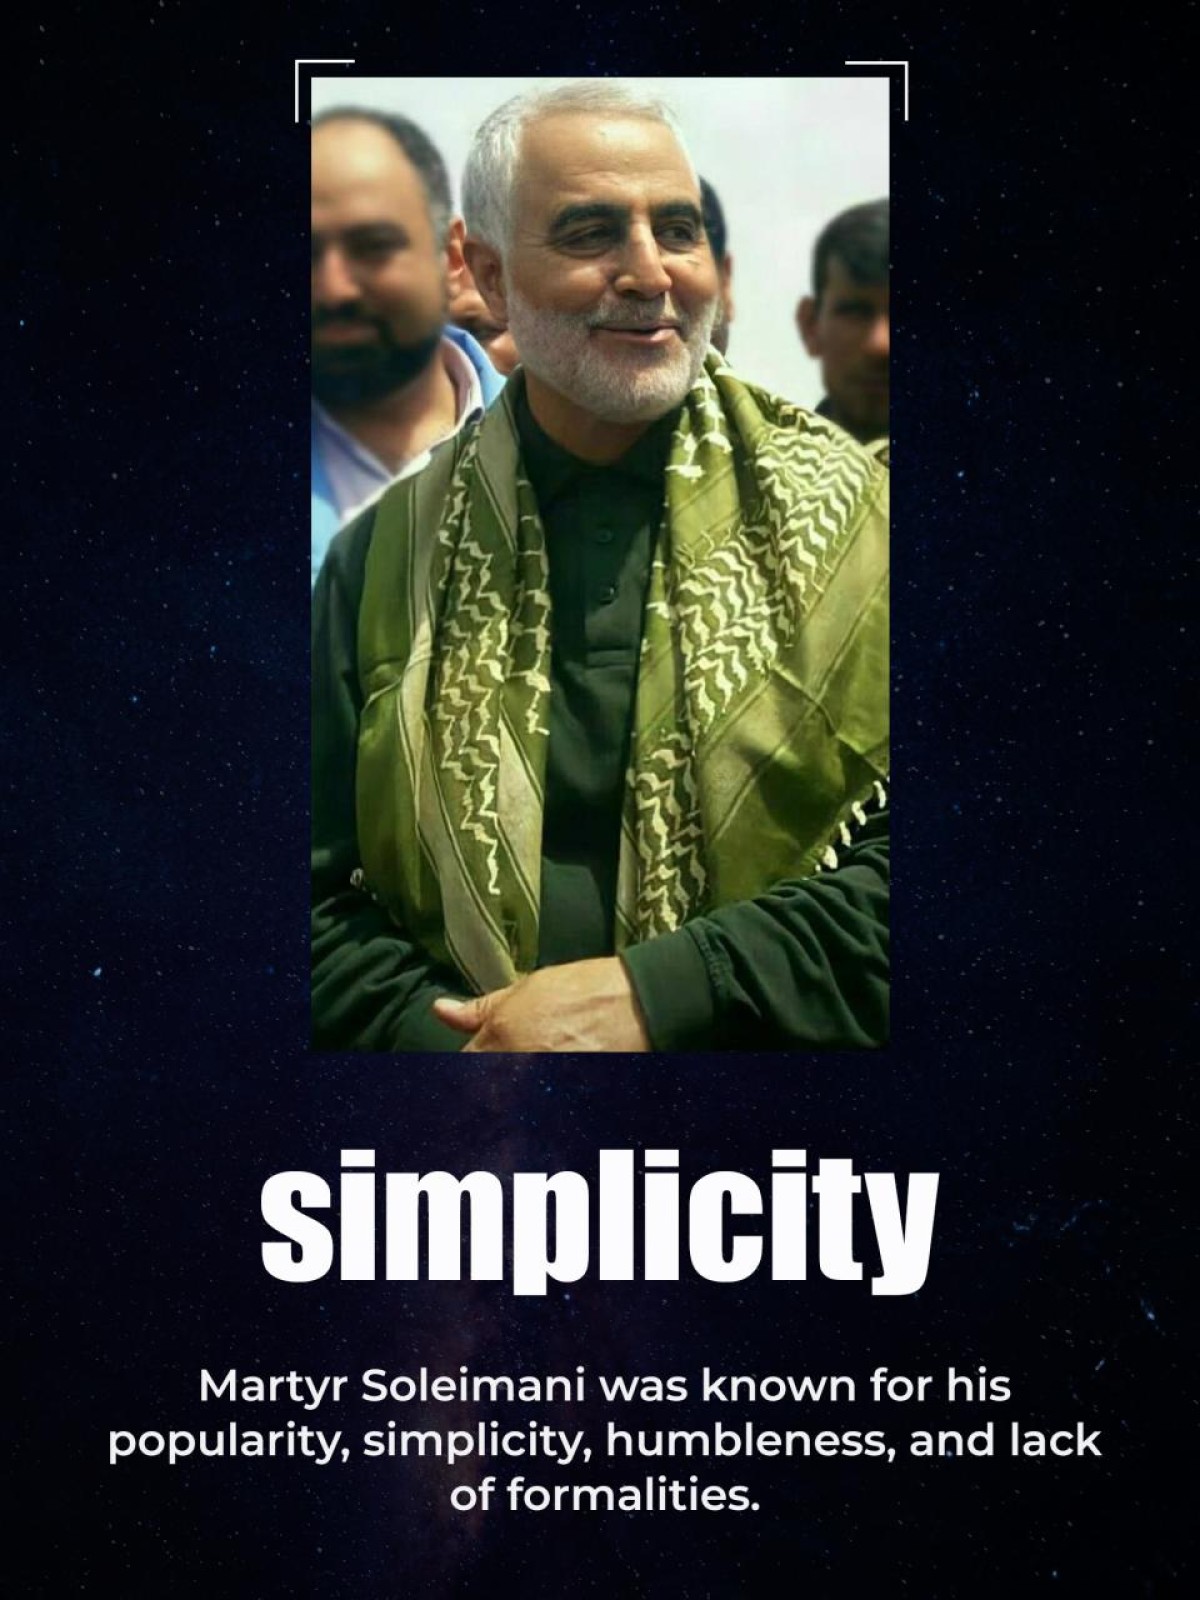 Martyr Soleimani was known for his popularity